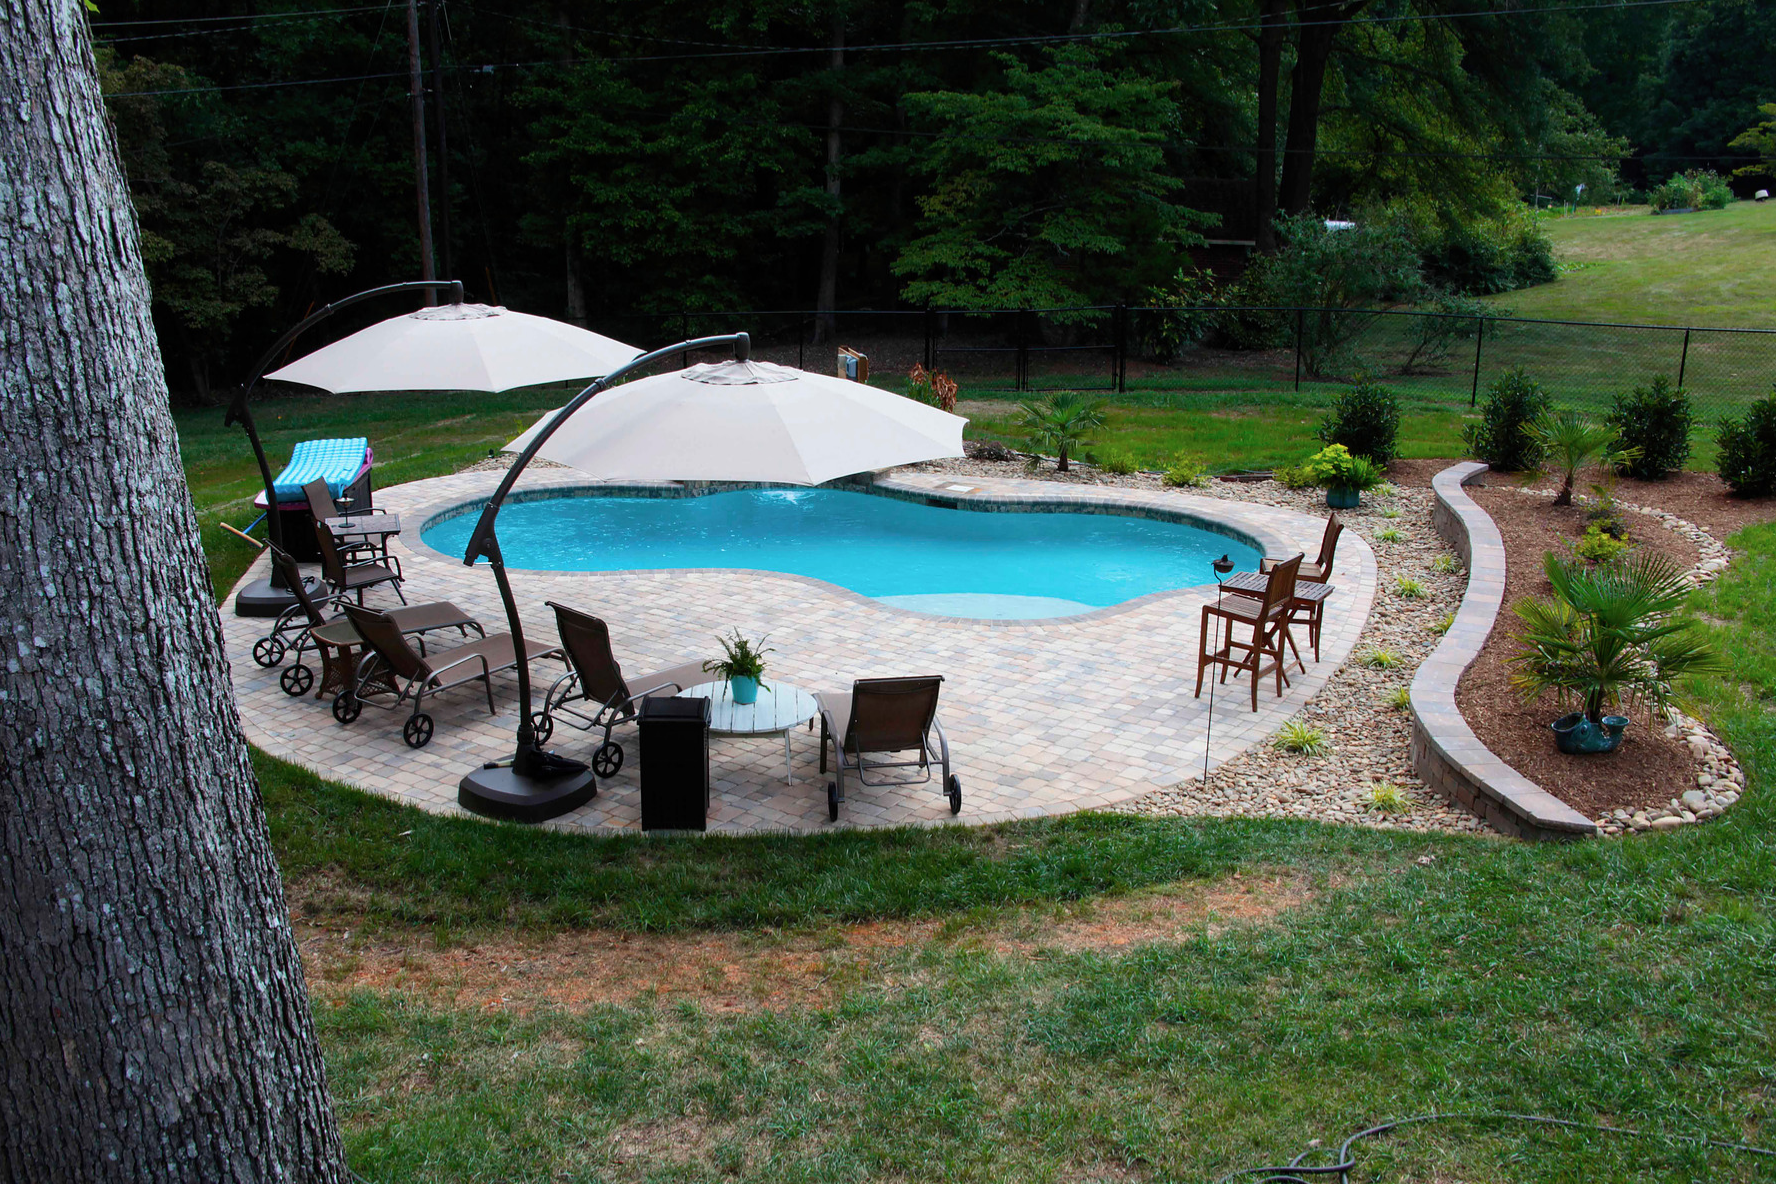 Davidson North Carolina Concrete Pool Installation Services from CPC Pools Call Us At 704-799-5236